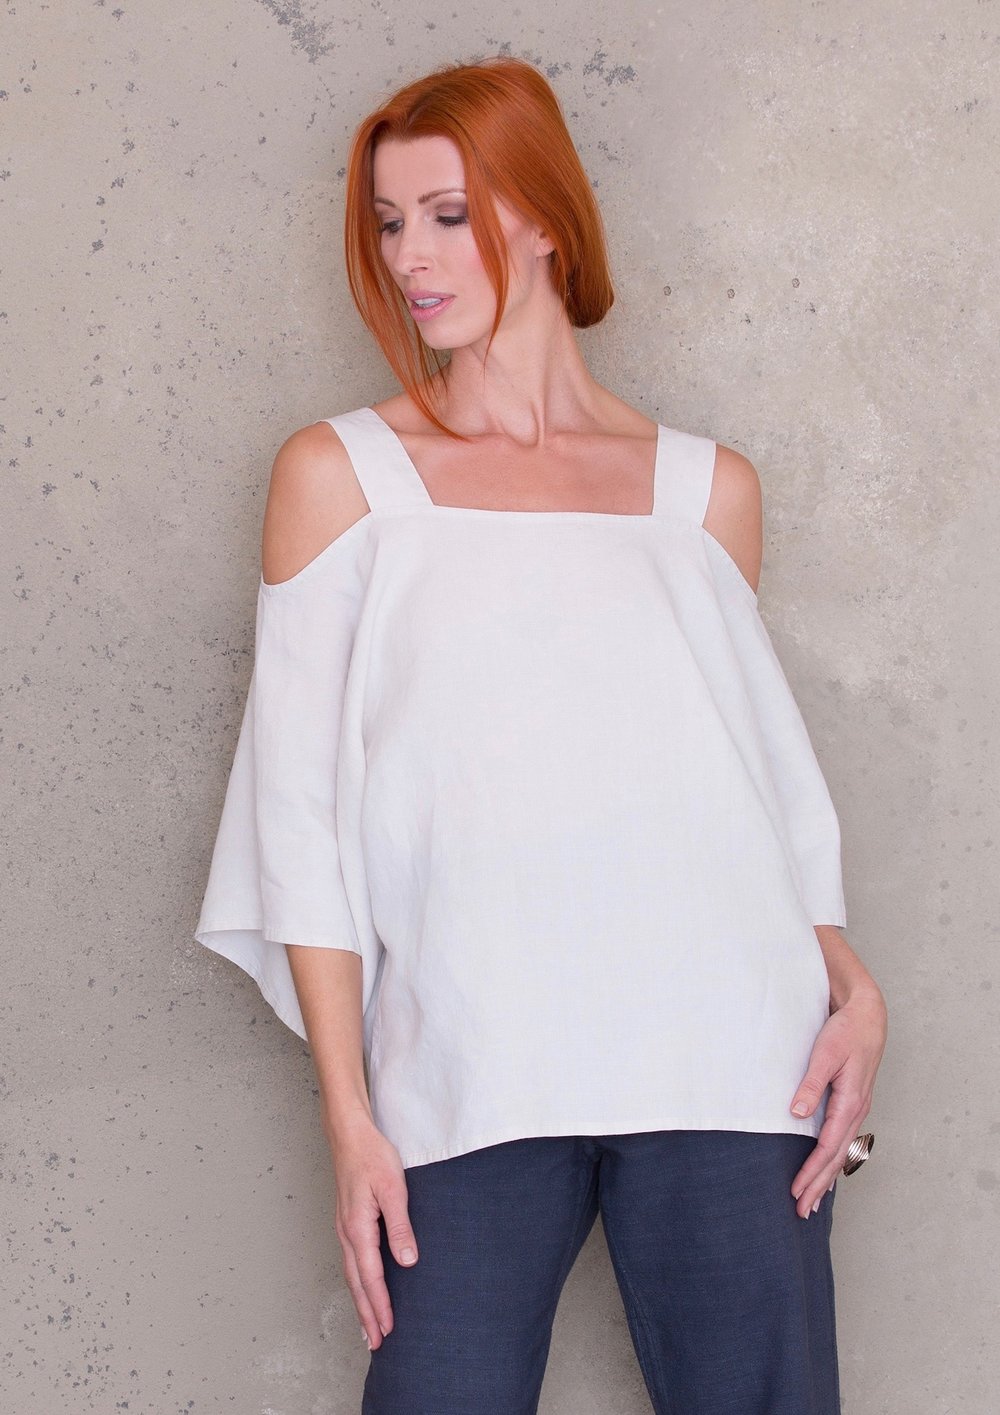 Ann Normandy Design Off the Shoulder Tunic Top Sewing Pattern